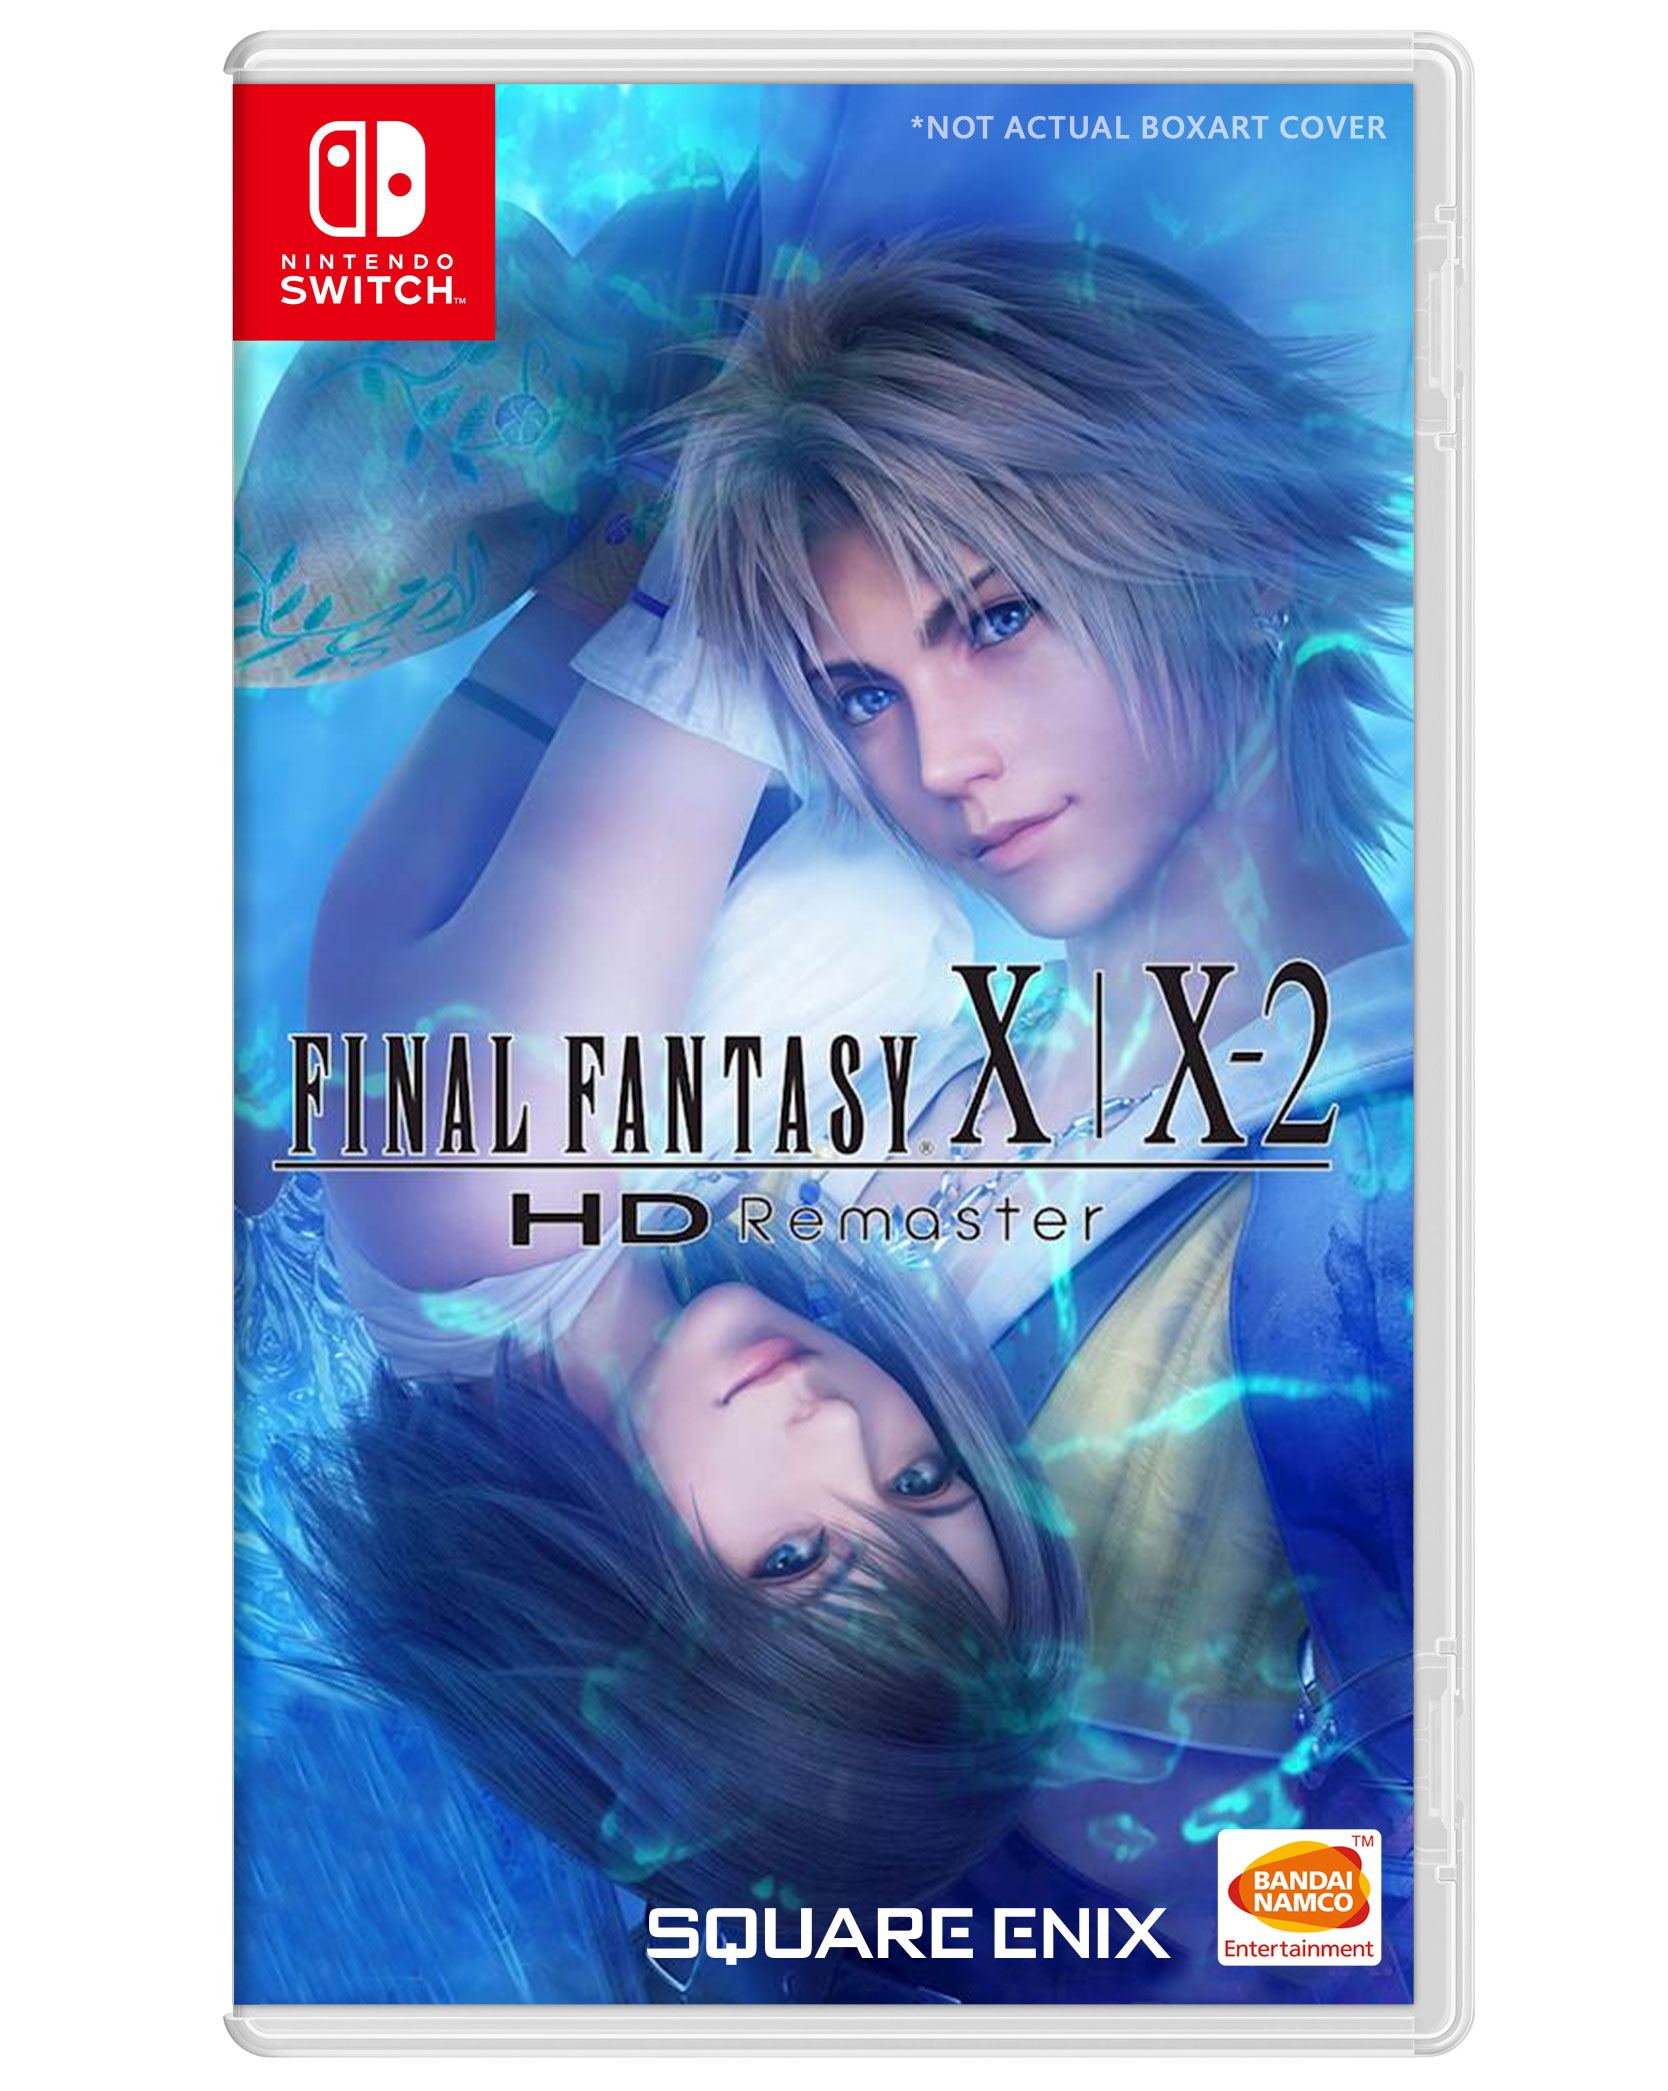 Which Version of Final Fantasy X & X-2 Should You Play? - All FFX